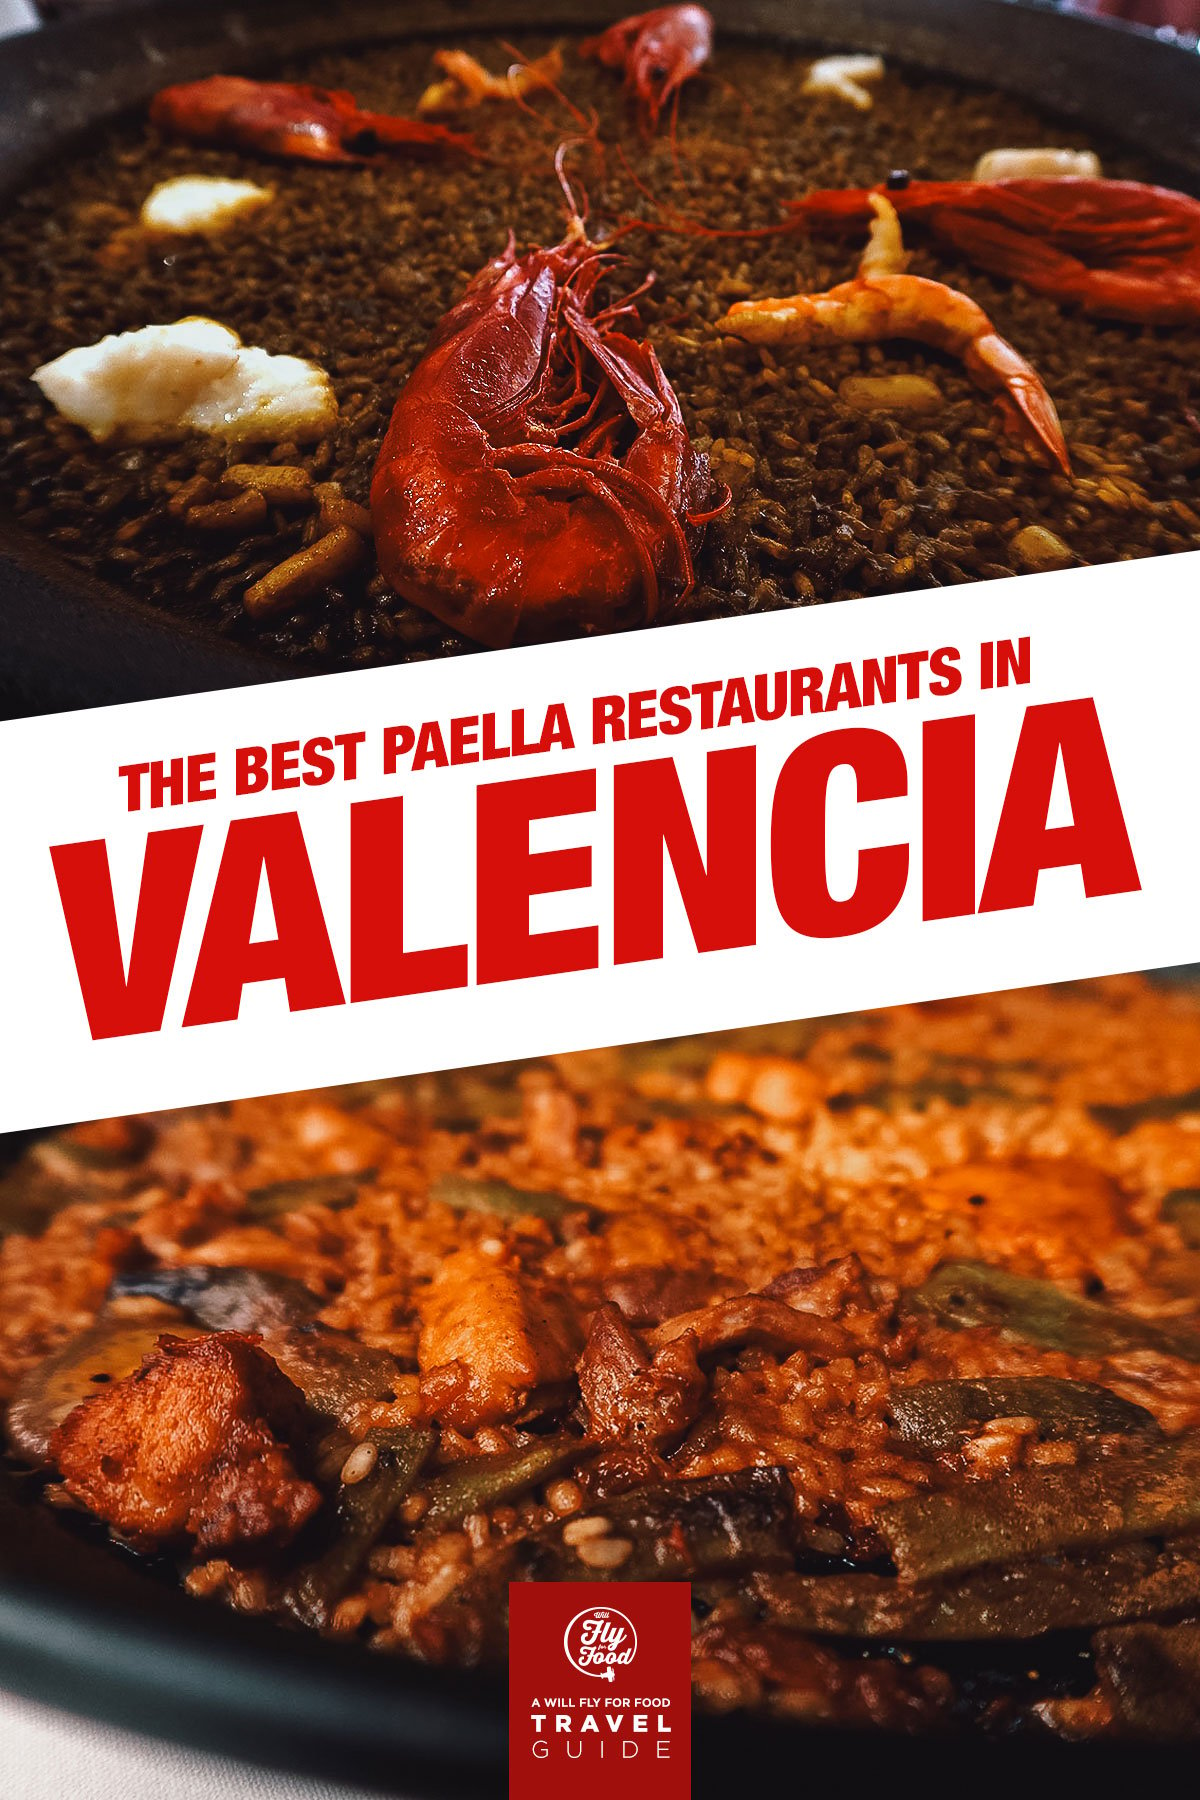 Paella dishes at restaurants in Valencia